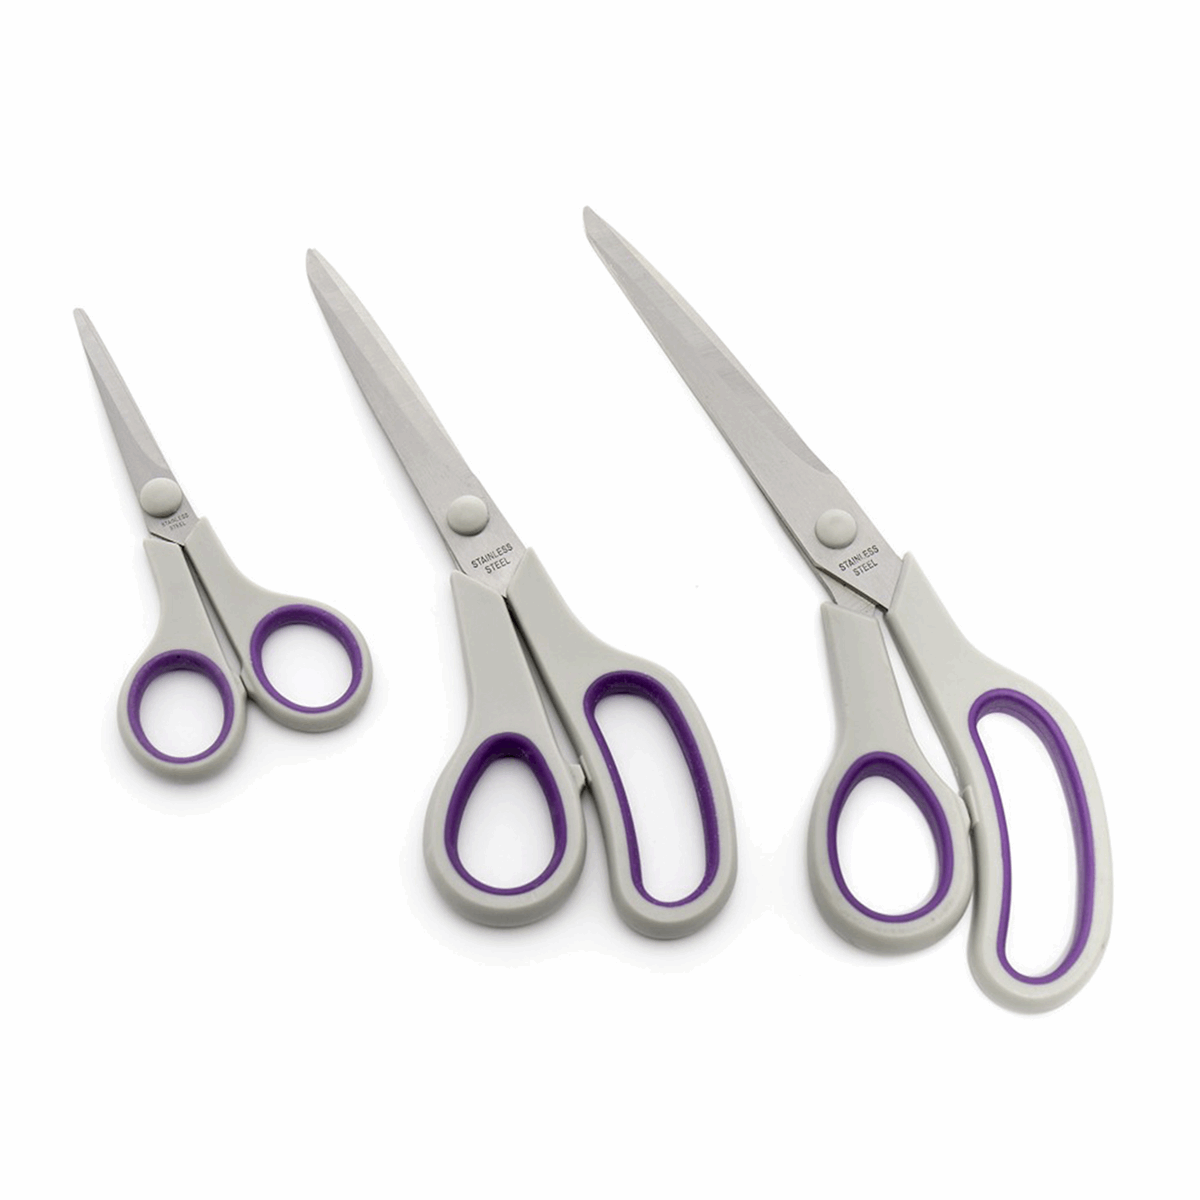 Luxury Set of 3 x Sewing Scissors - Heavy Duty for Dressmaking, Sewing and Embroidery